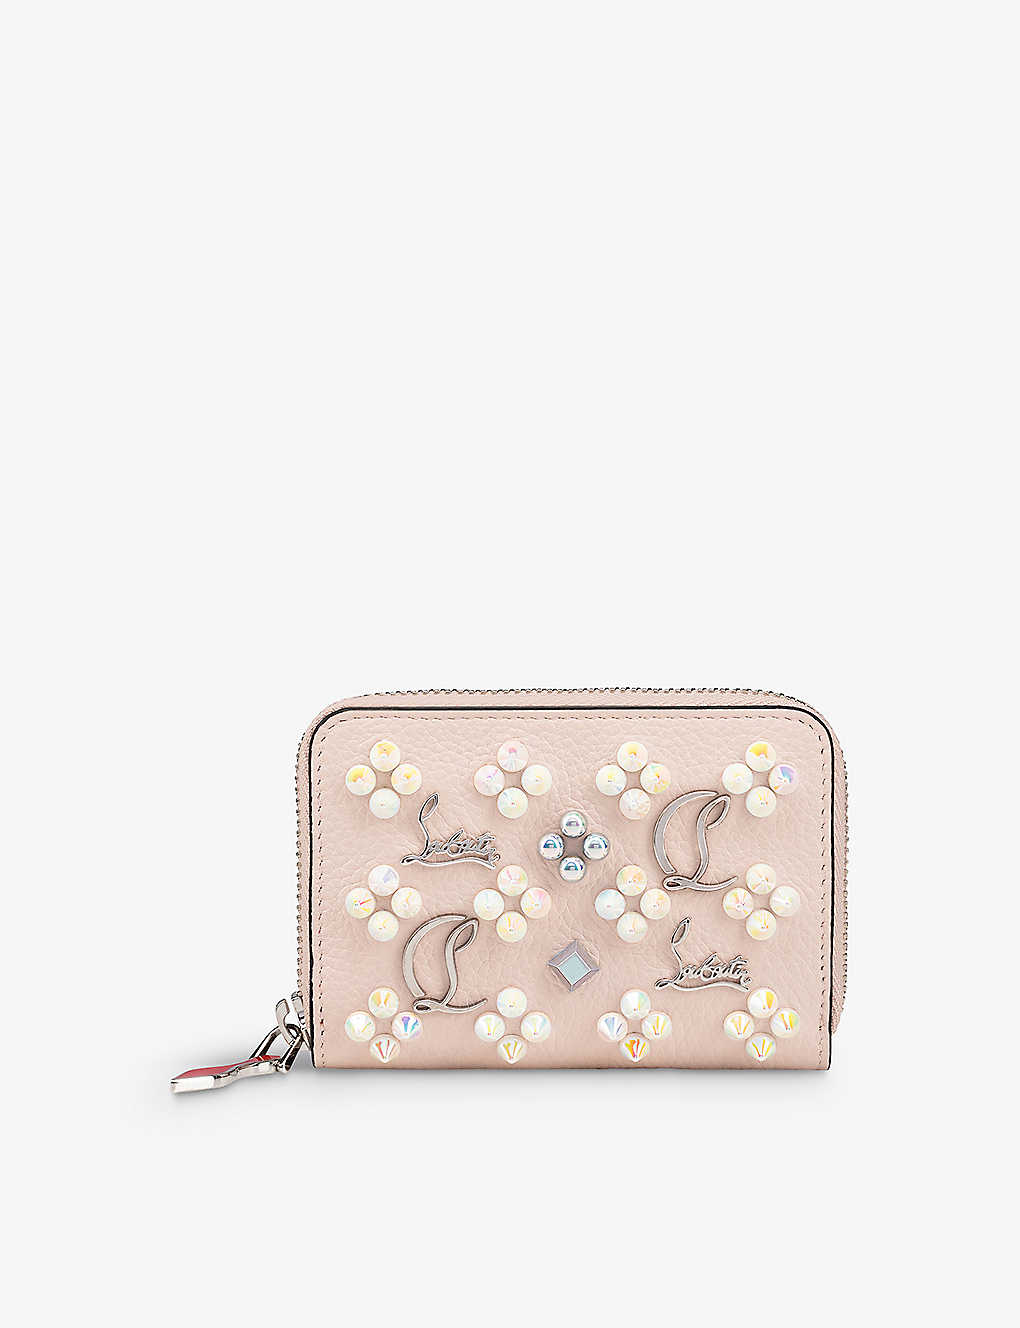 Christian Louboutin Women's Leche Panettone Studded Leather Coin Purse